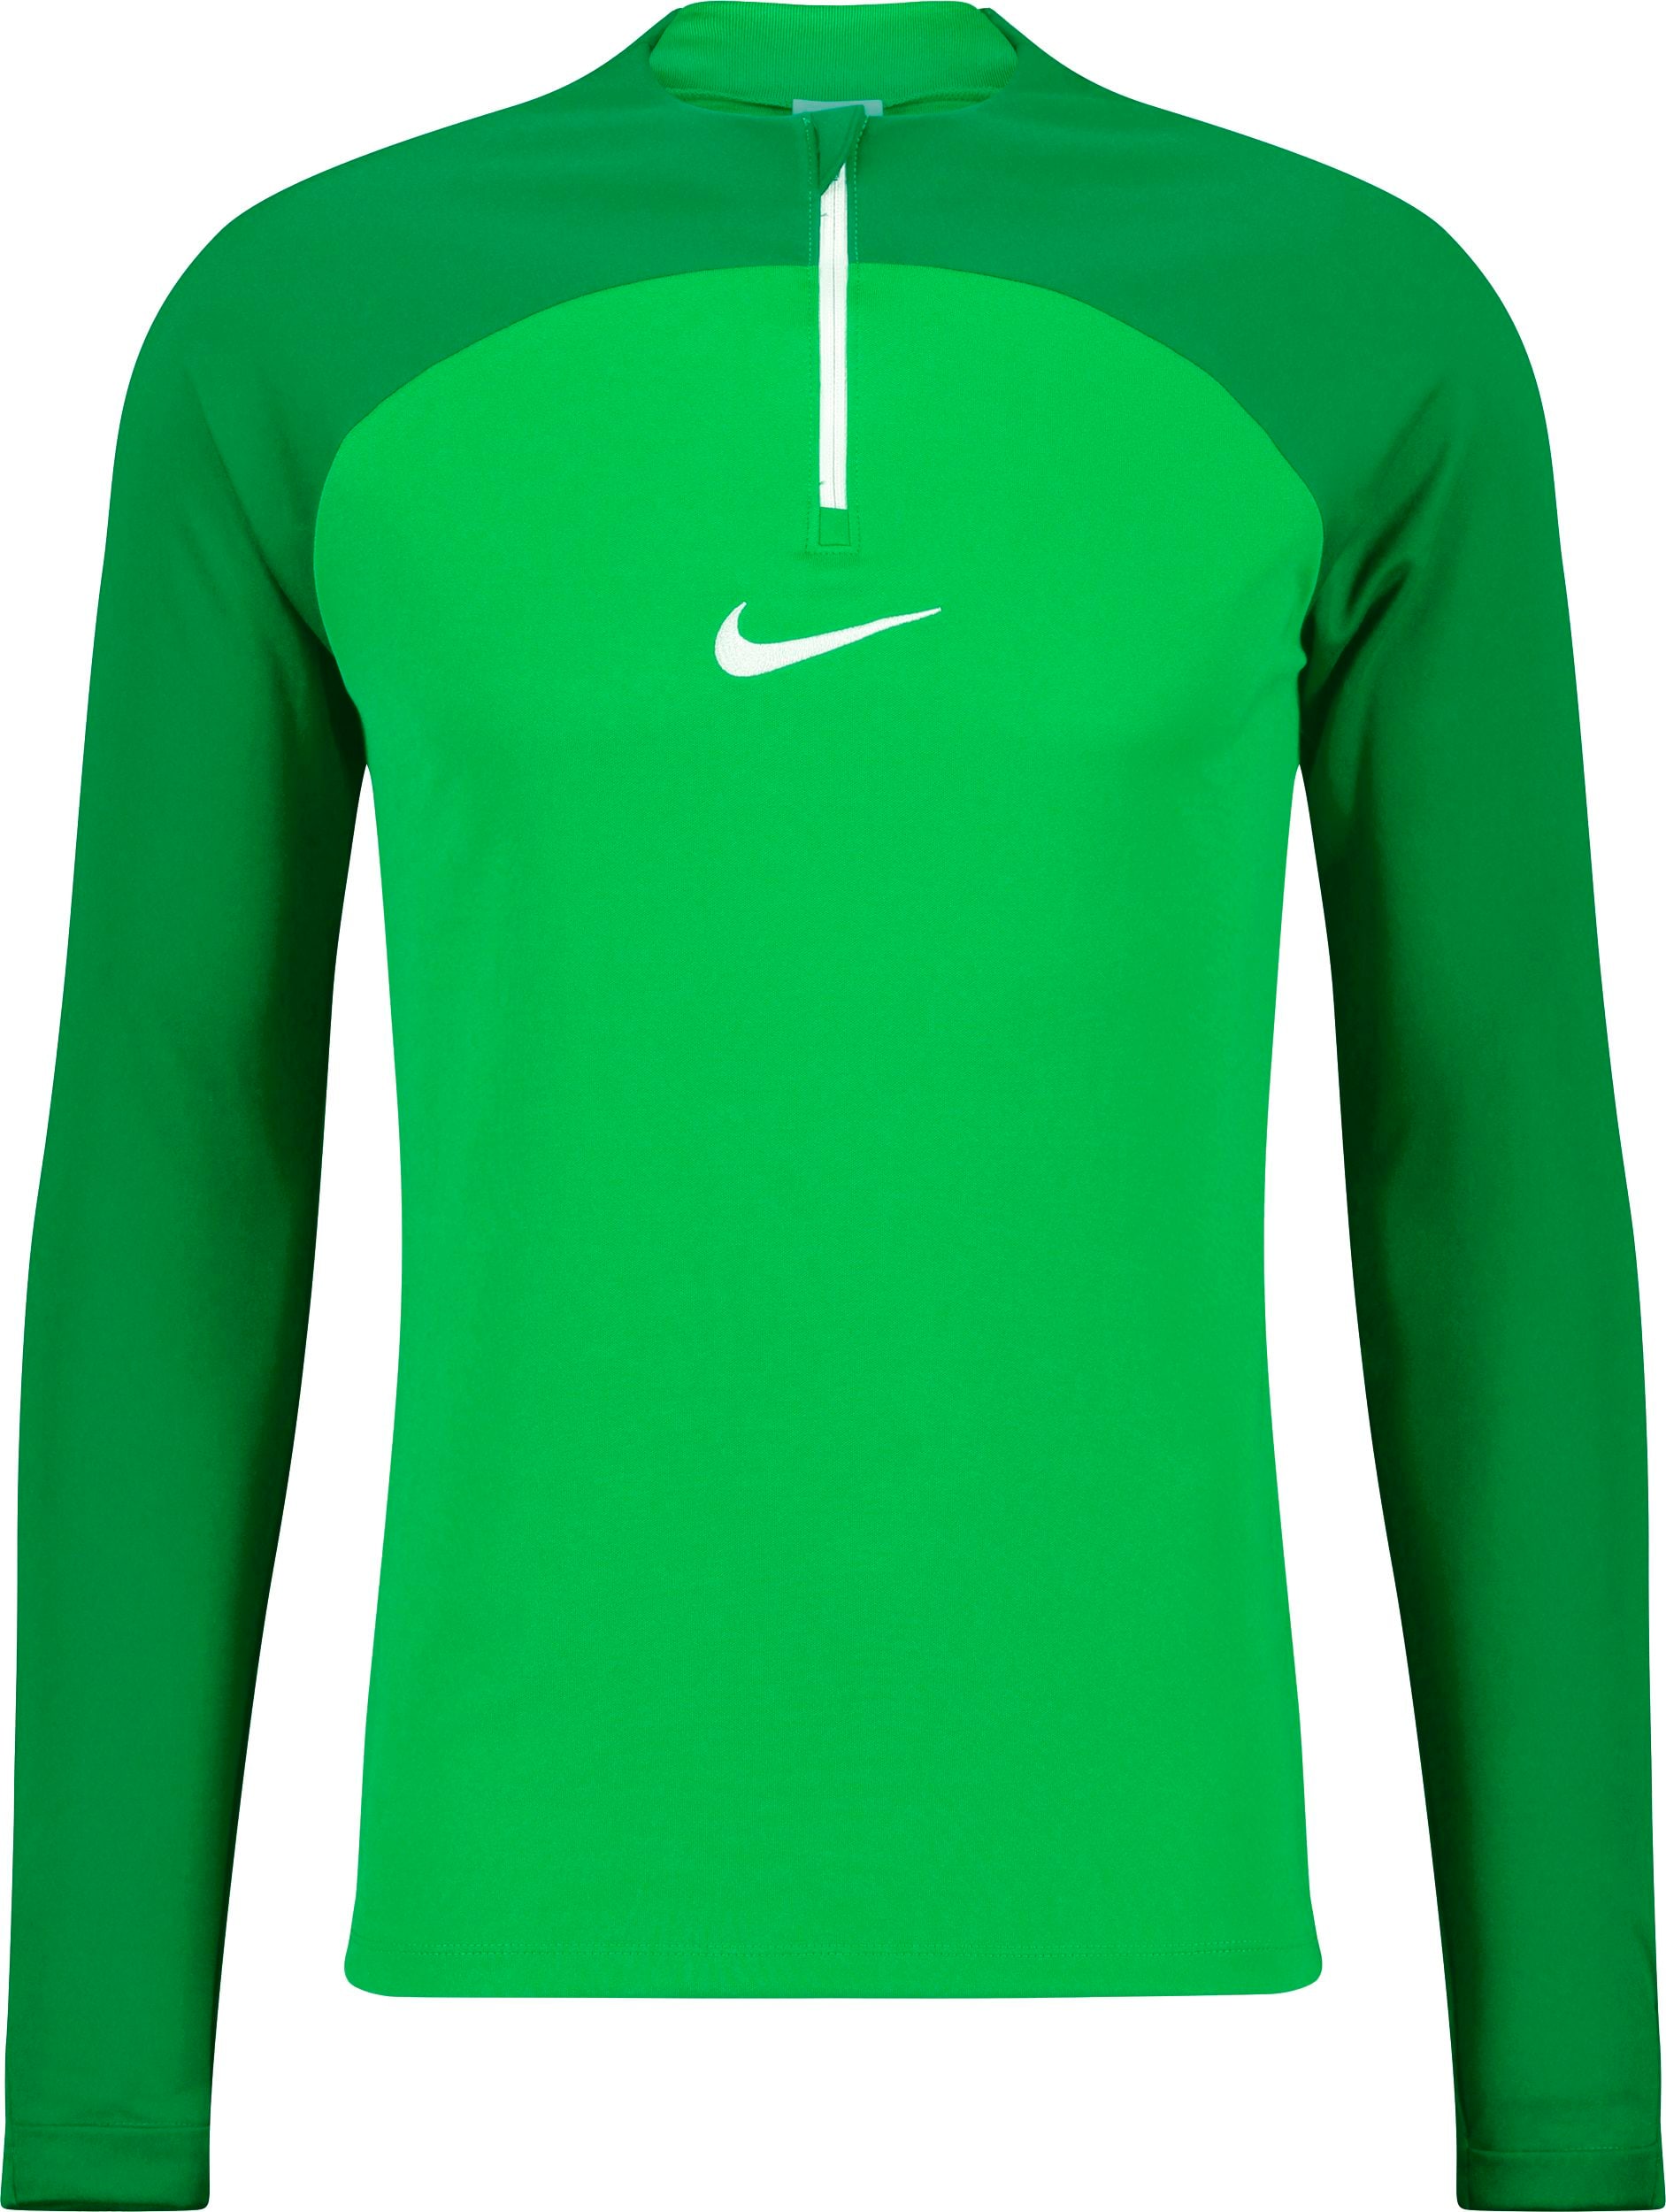 NIKE, ACADEMY PRO DRILL TOP JR